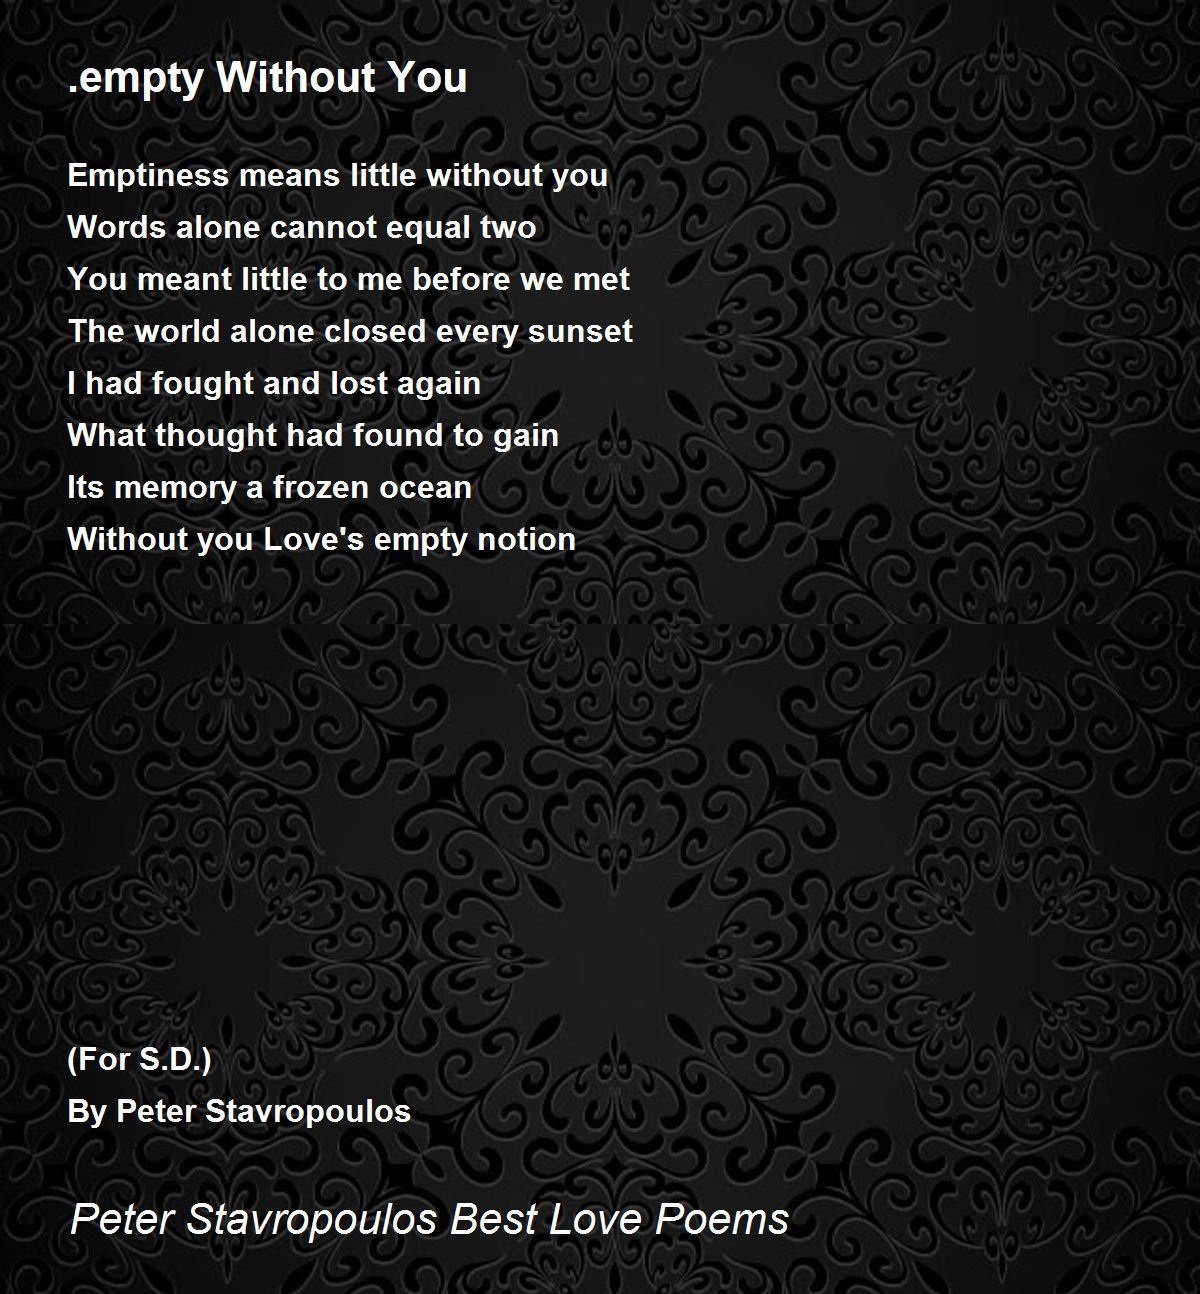 .empty Without You Poem by Peter Stavropoulos (Best Love Poems) - Poem A Picture Is A Poem Without Words Meaning